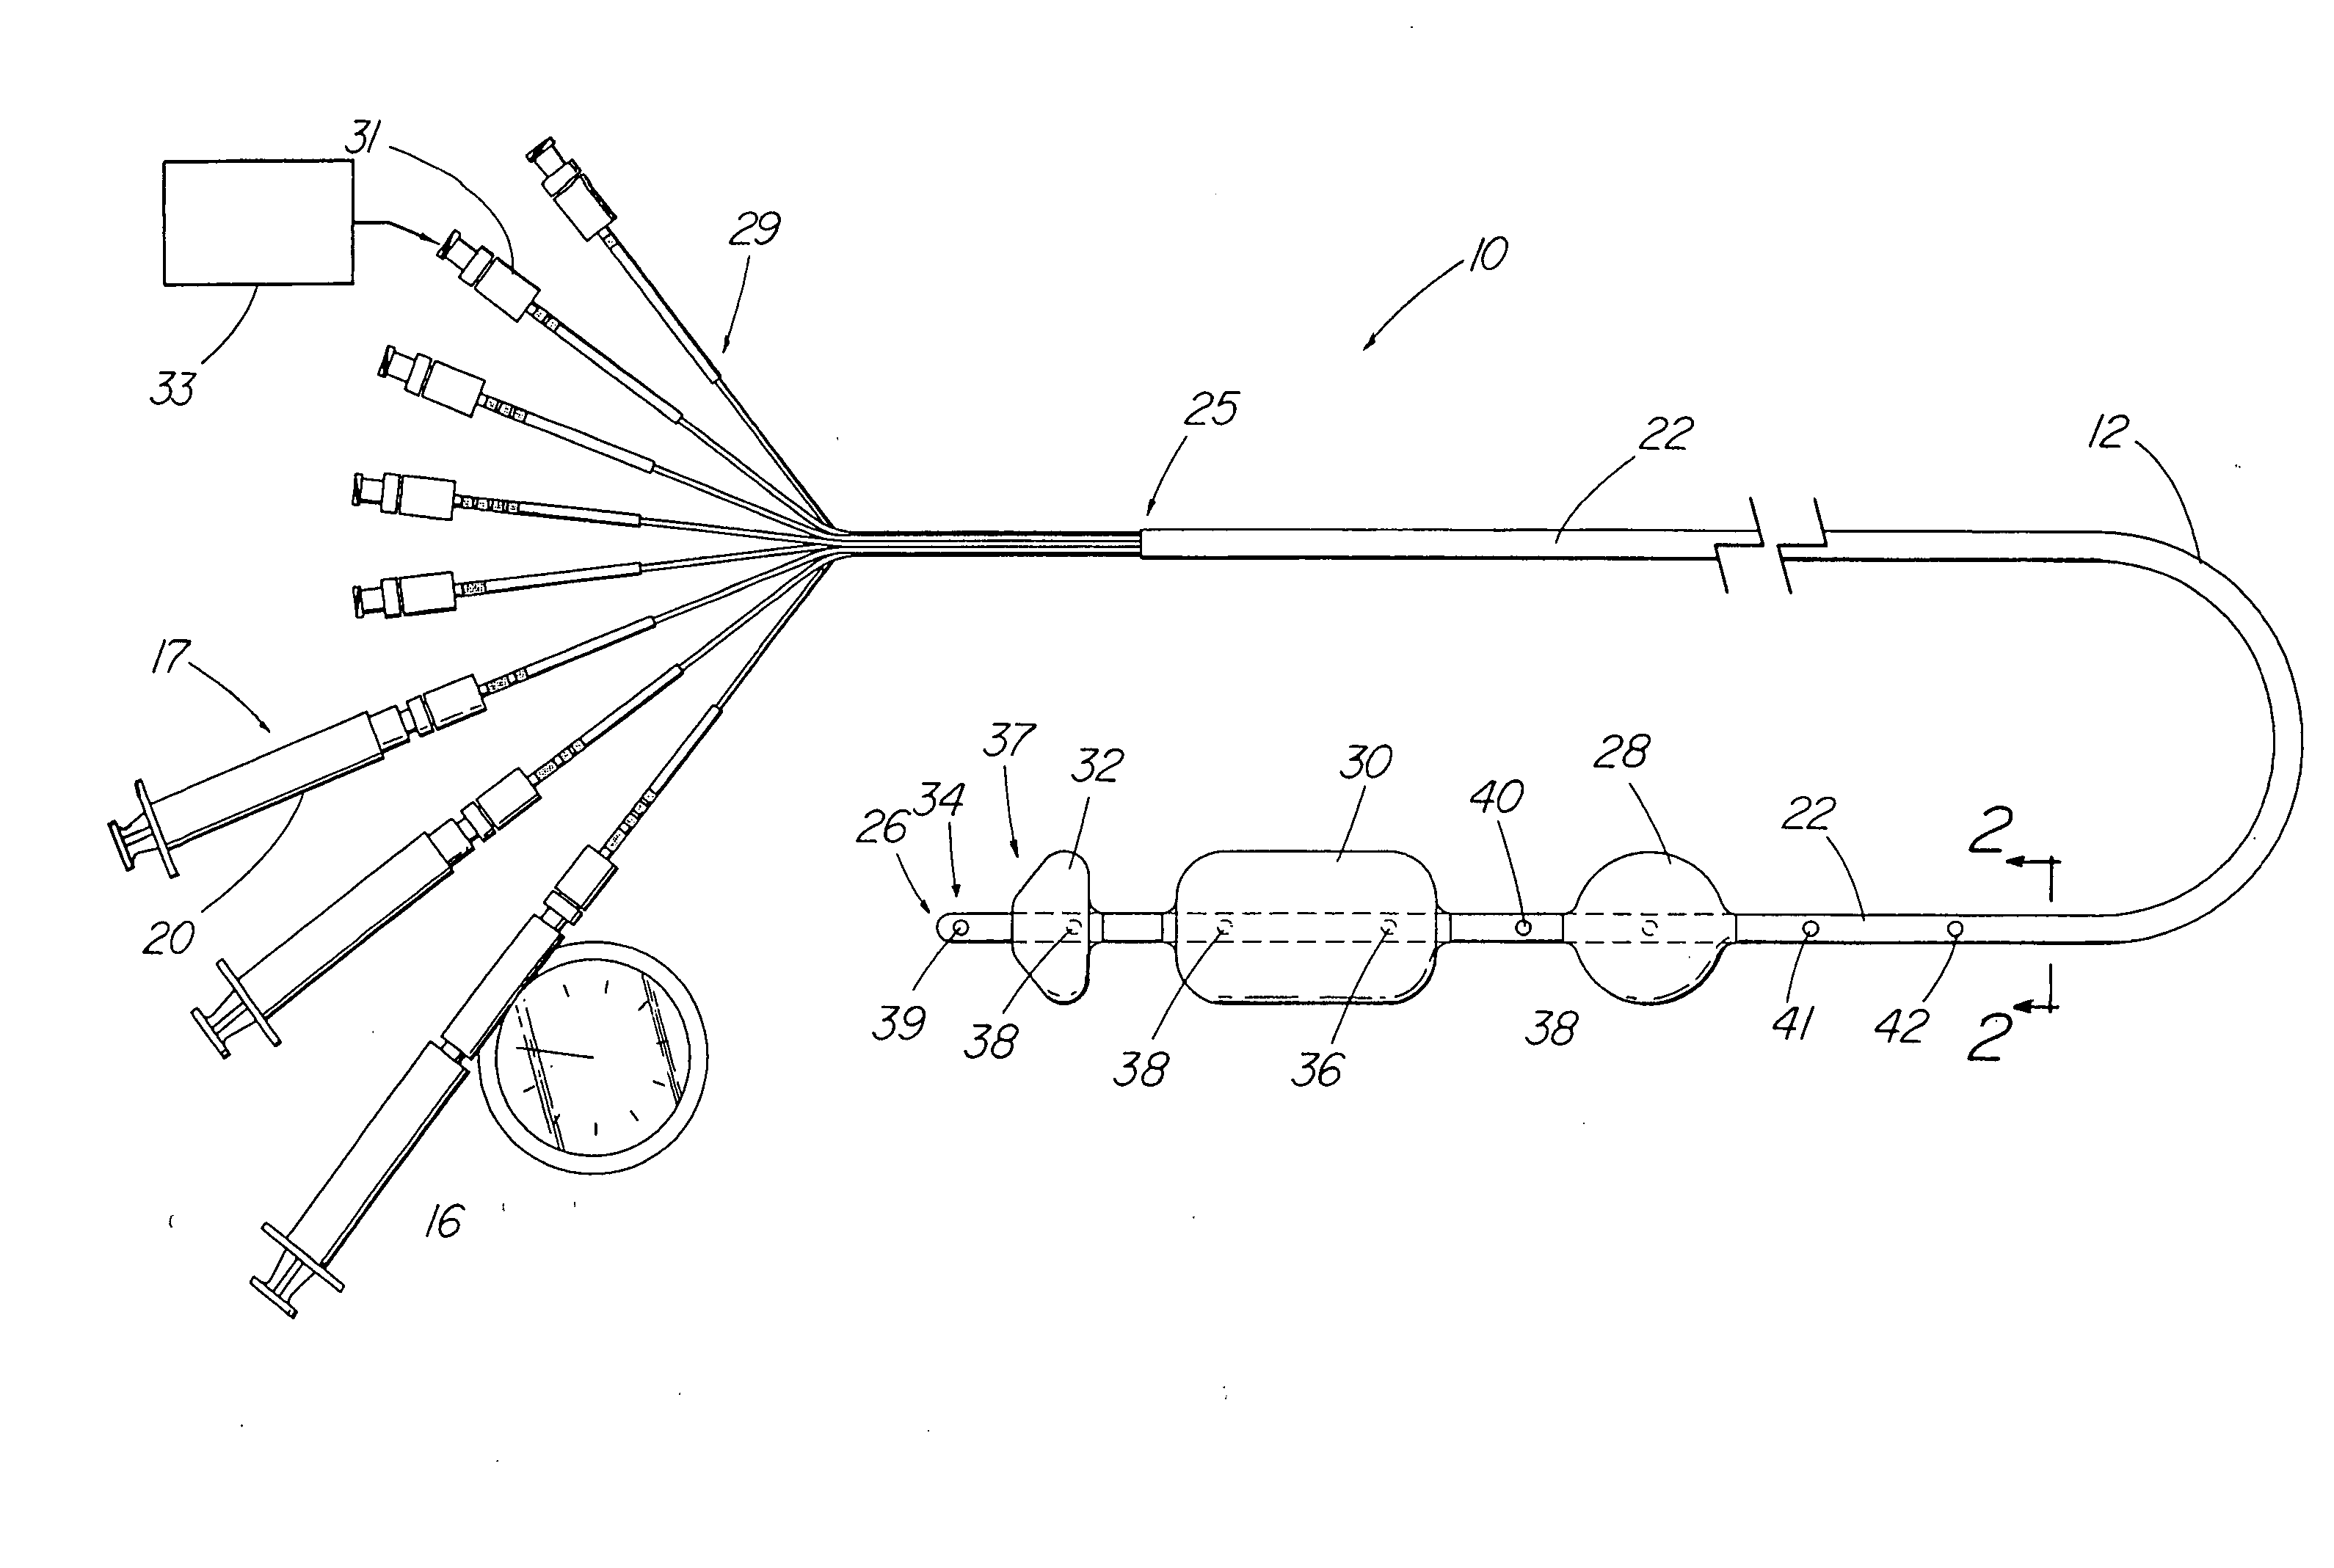 Method for measuring esophageal sphincter compliance